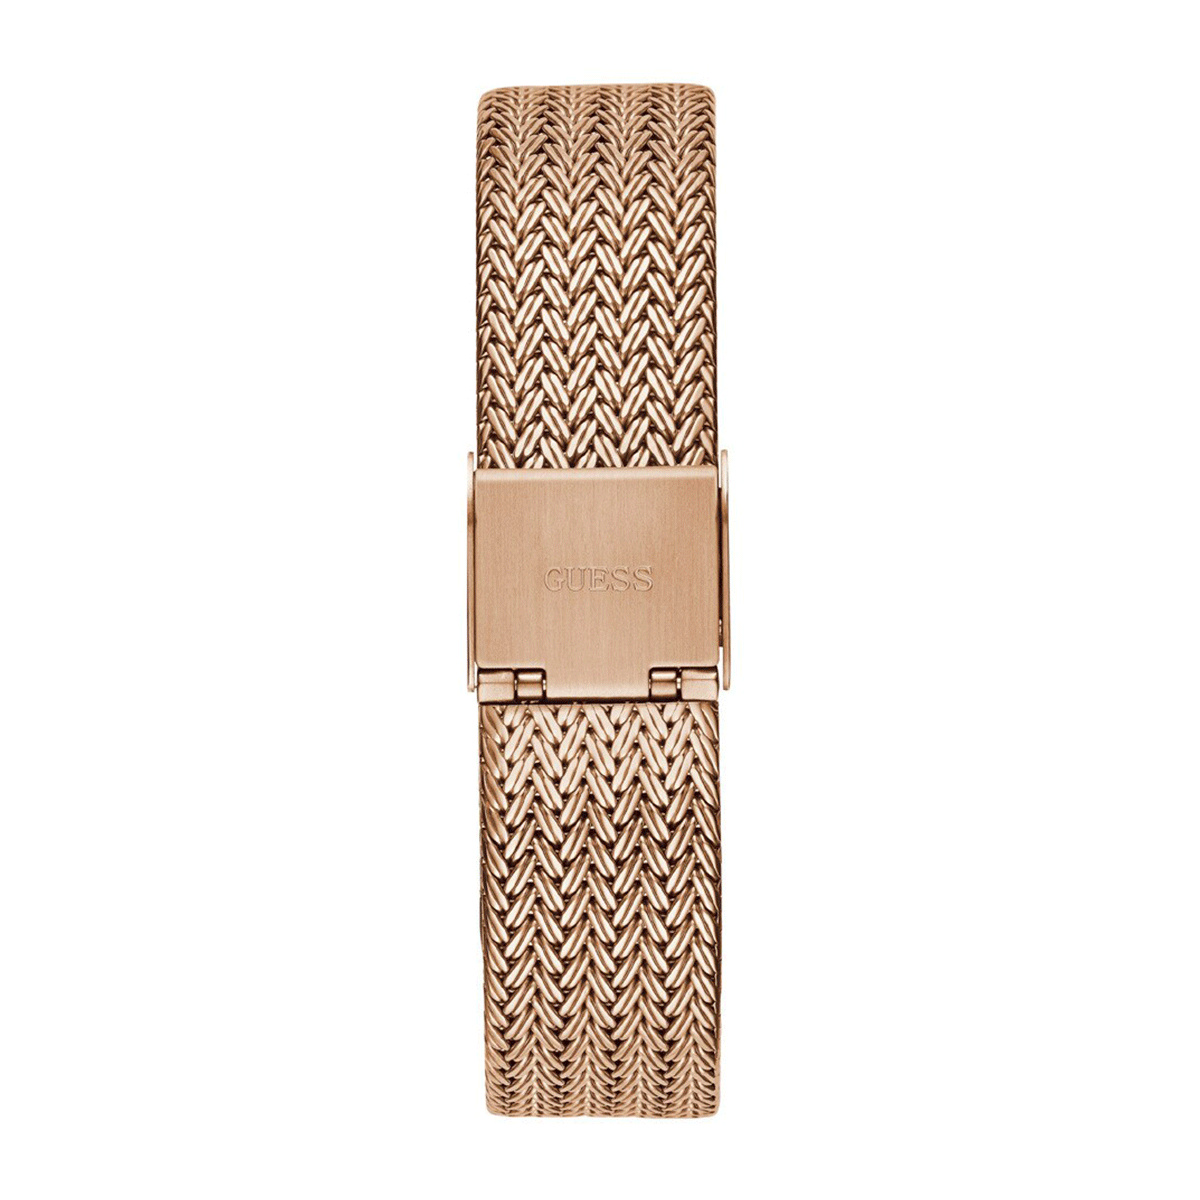 Soiree Water-Resistant Analogue Watch for women